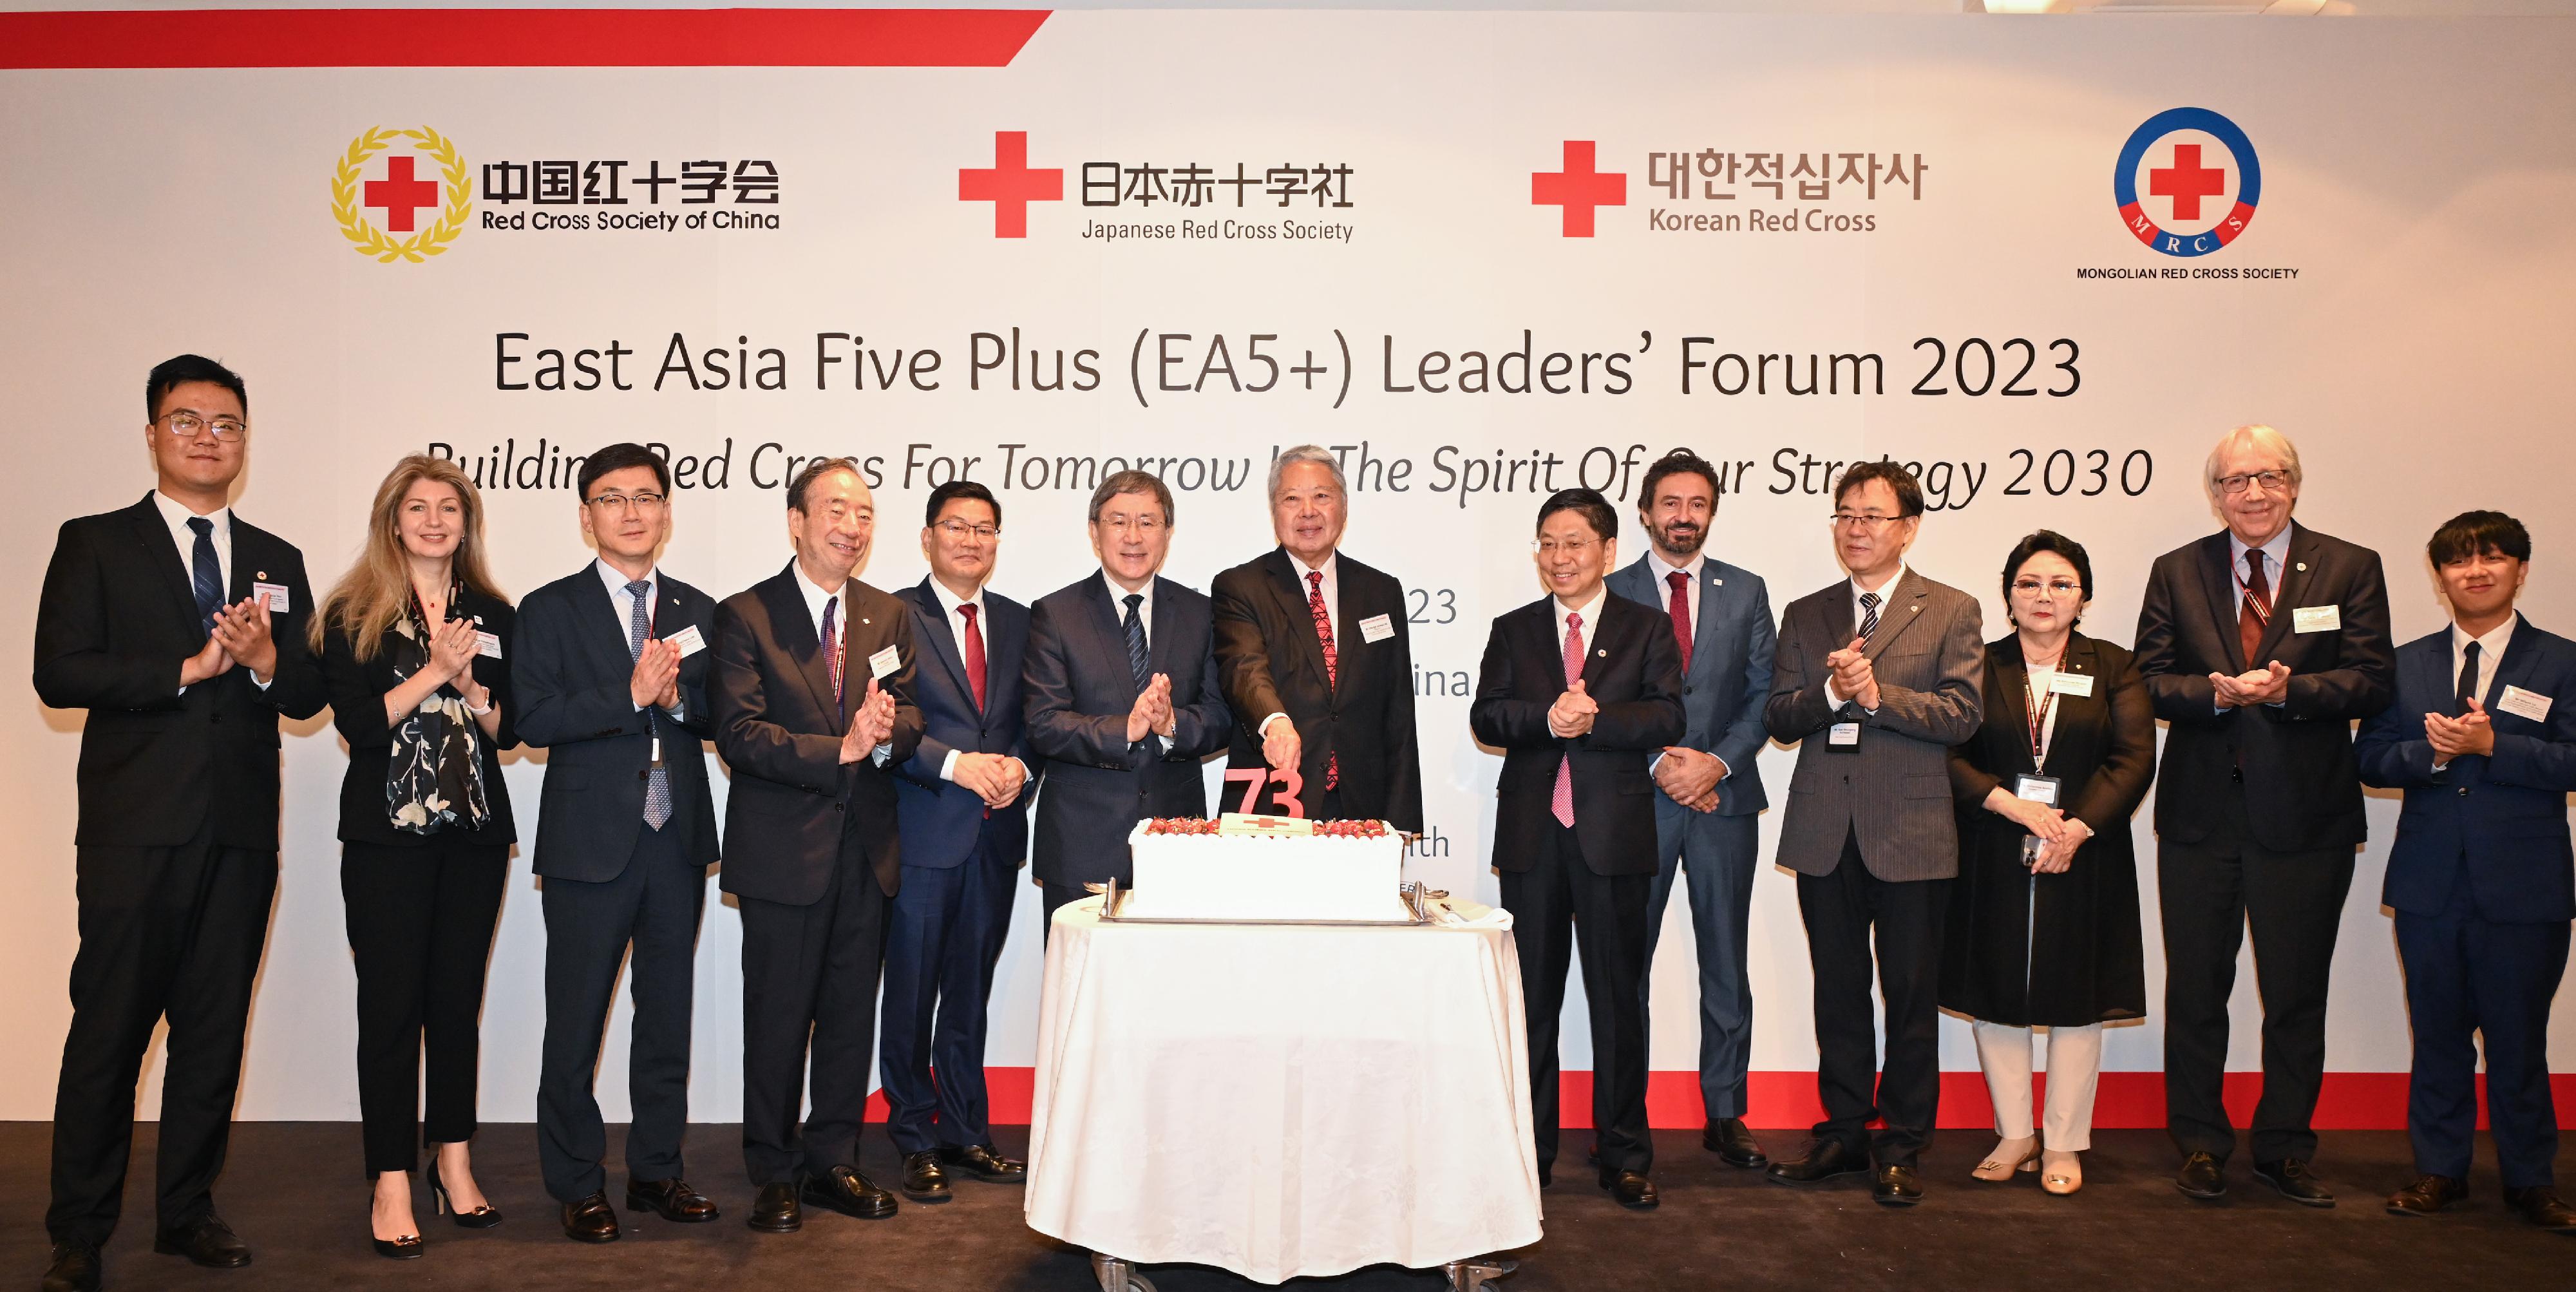 The Deputy Chief Secretary for Administration, Mr Cheuk Wing-hing (sixth left), joins the President of the Hong Kong Red Cross, Mr George Joseph Ho (centre), and guests in a cake cutting at the East Asia Five Plus (EA5+) Leaders' Forum 2023 Opening Ceremony and Hong Kong Red Cross 73rd Anniversary Celebration today (July 12). Also present are the Executive Vice President of the Red Cross Society of China, Mr Wang Ke (sixth right), and the Deputy Director-General of the Co-ordination Department of the Liaison Office of the Central People's Government in the Hong Kong Special Administrative Region, Mr Chen Zetao (fifth left).